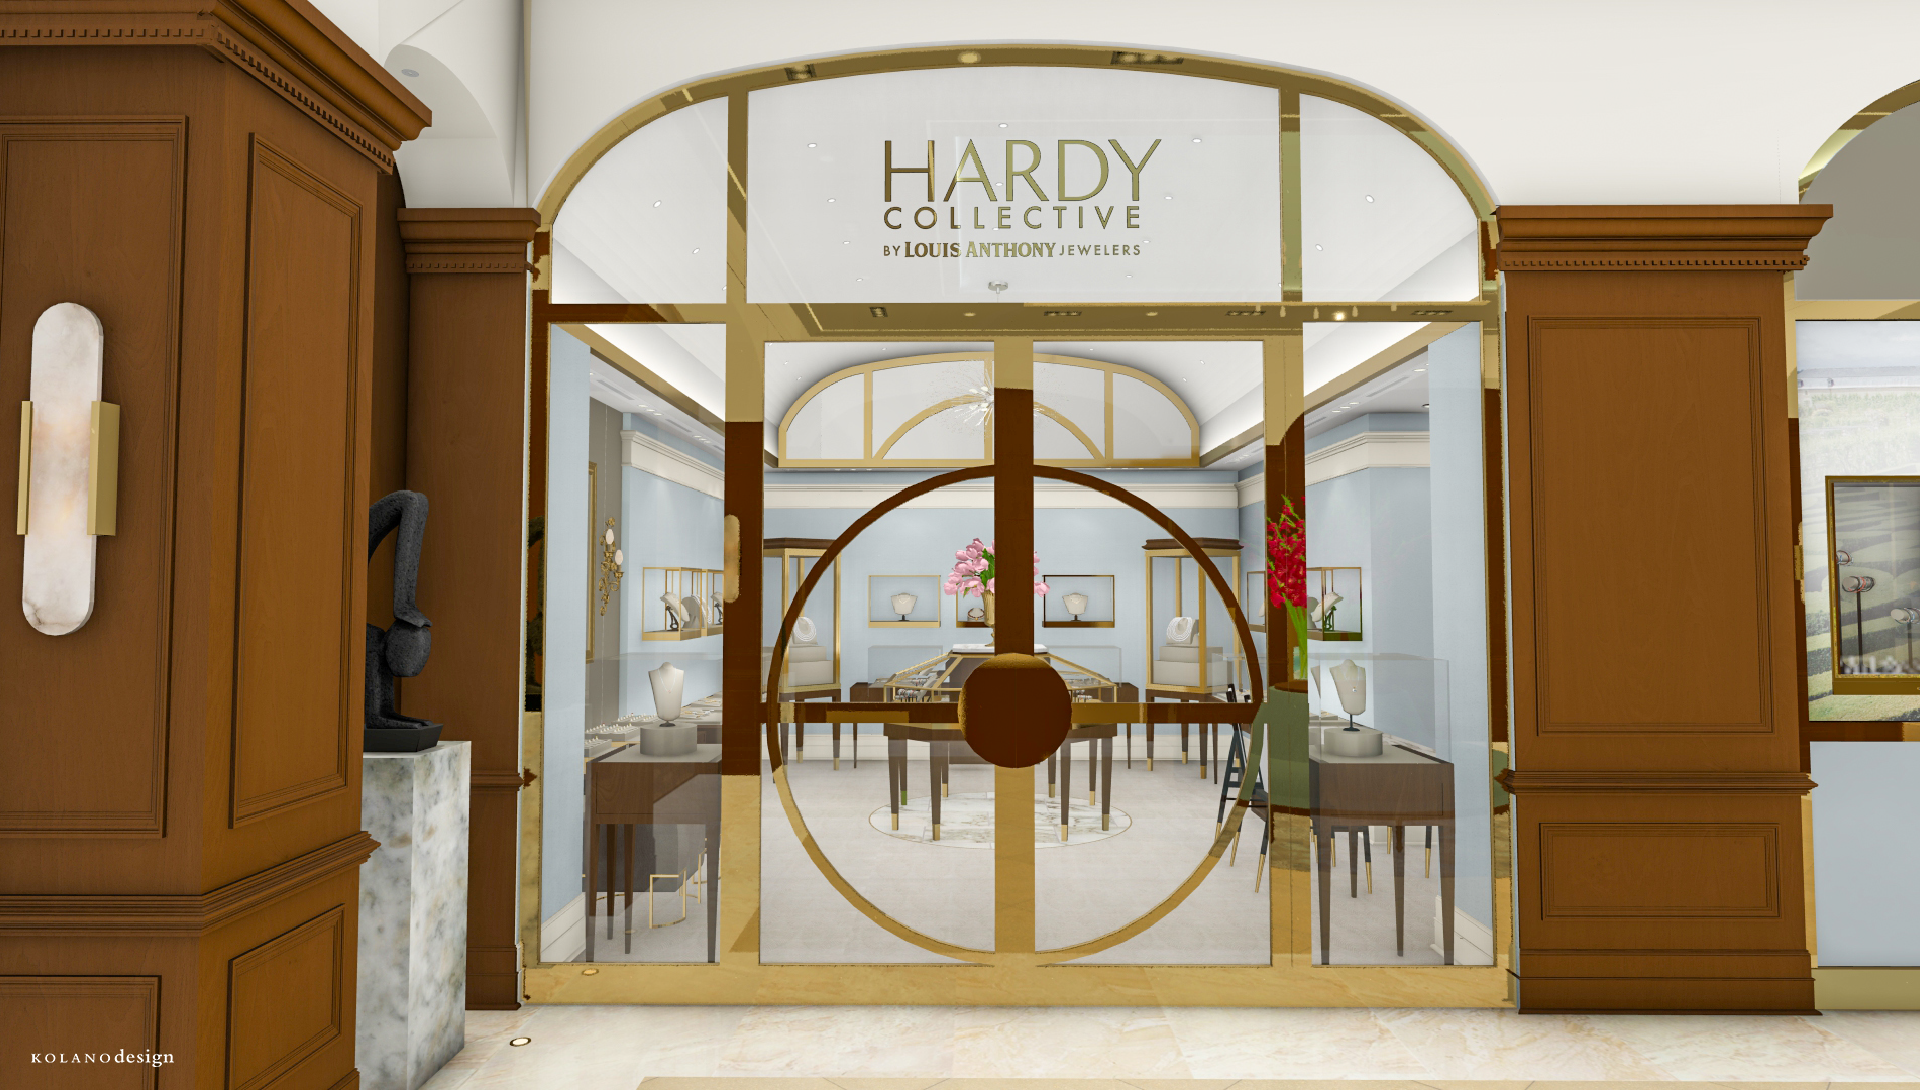 Hardy Collective by Louis Anthony Jewelers